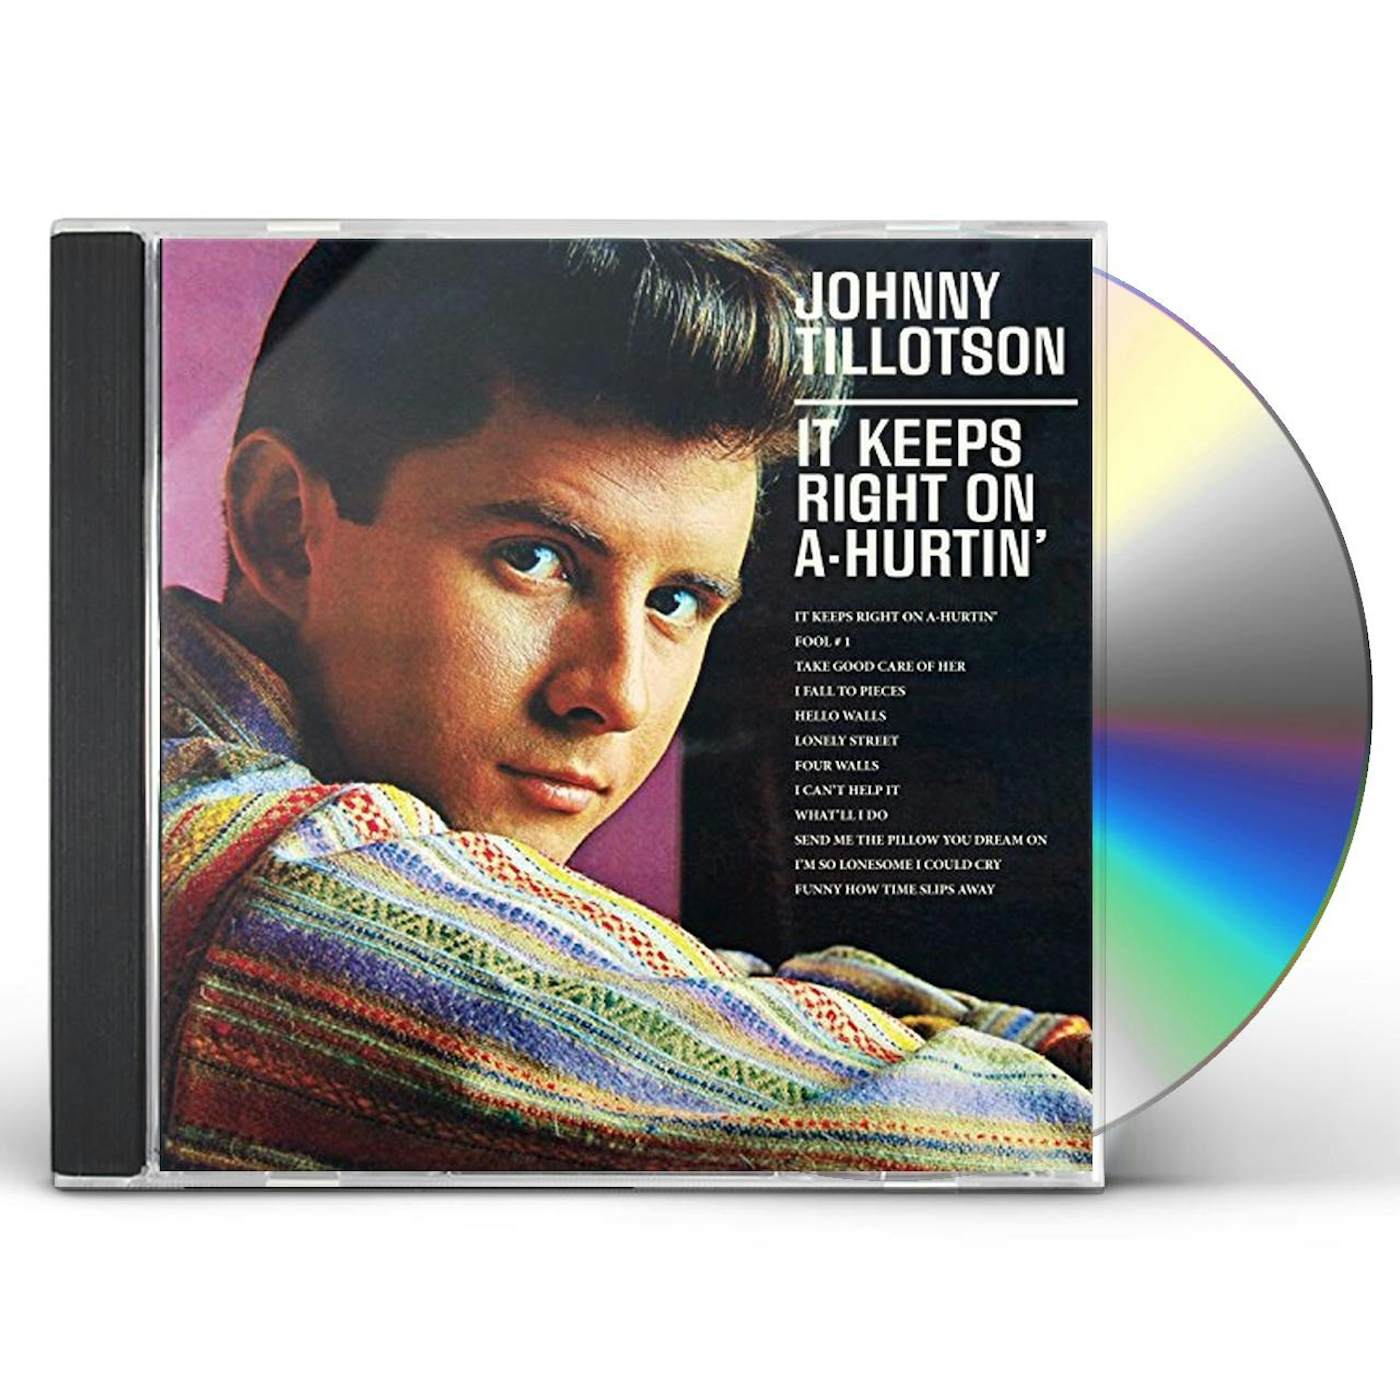 Johnny Tillotson IT KEEPS RIGHT ON A-HURTIN CD